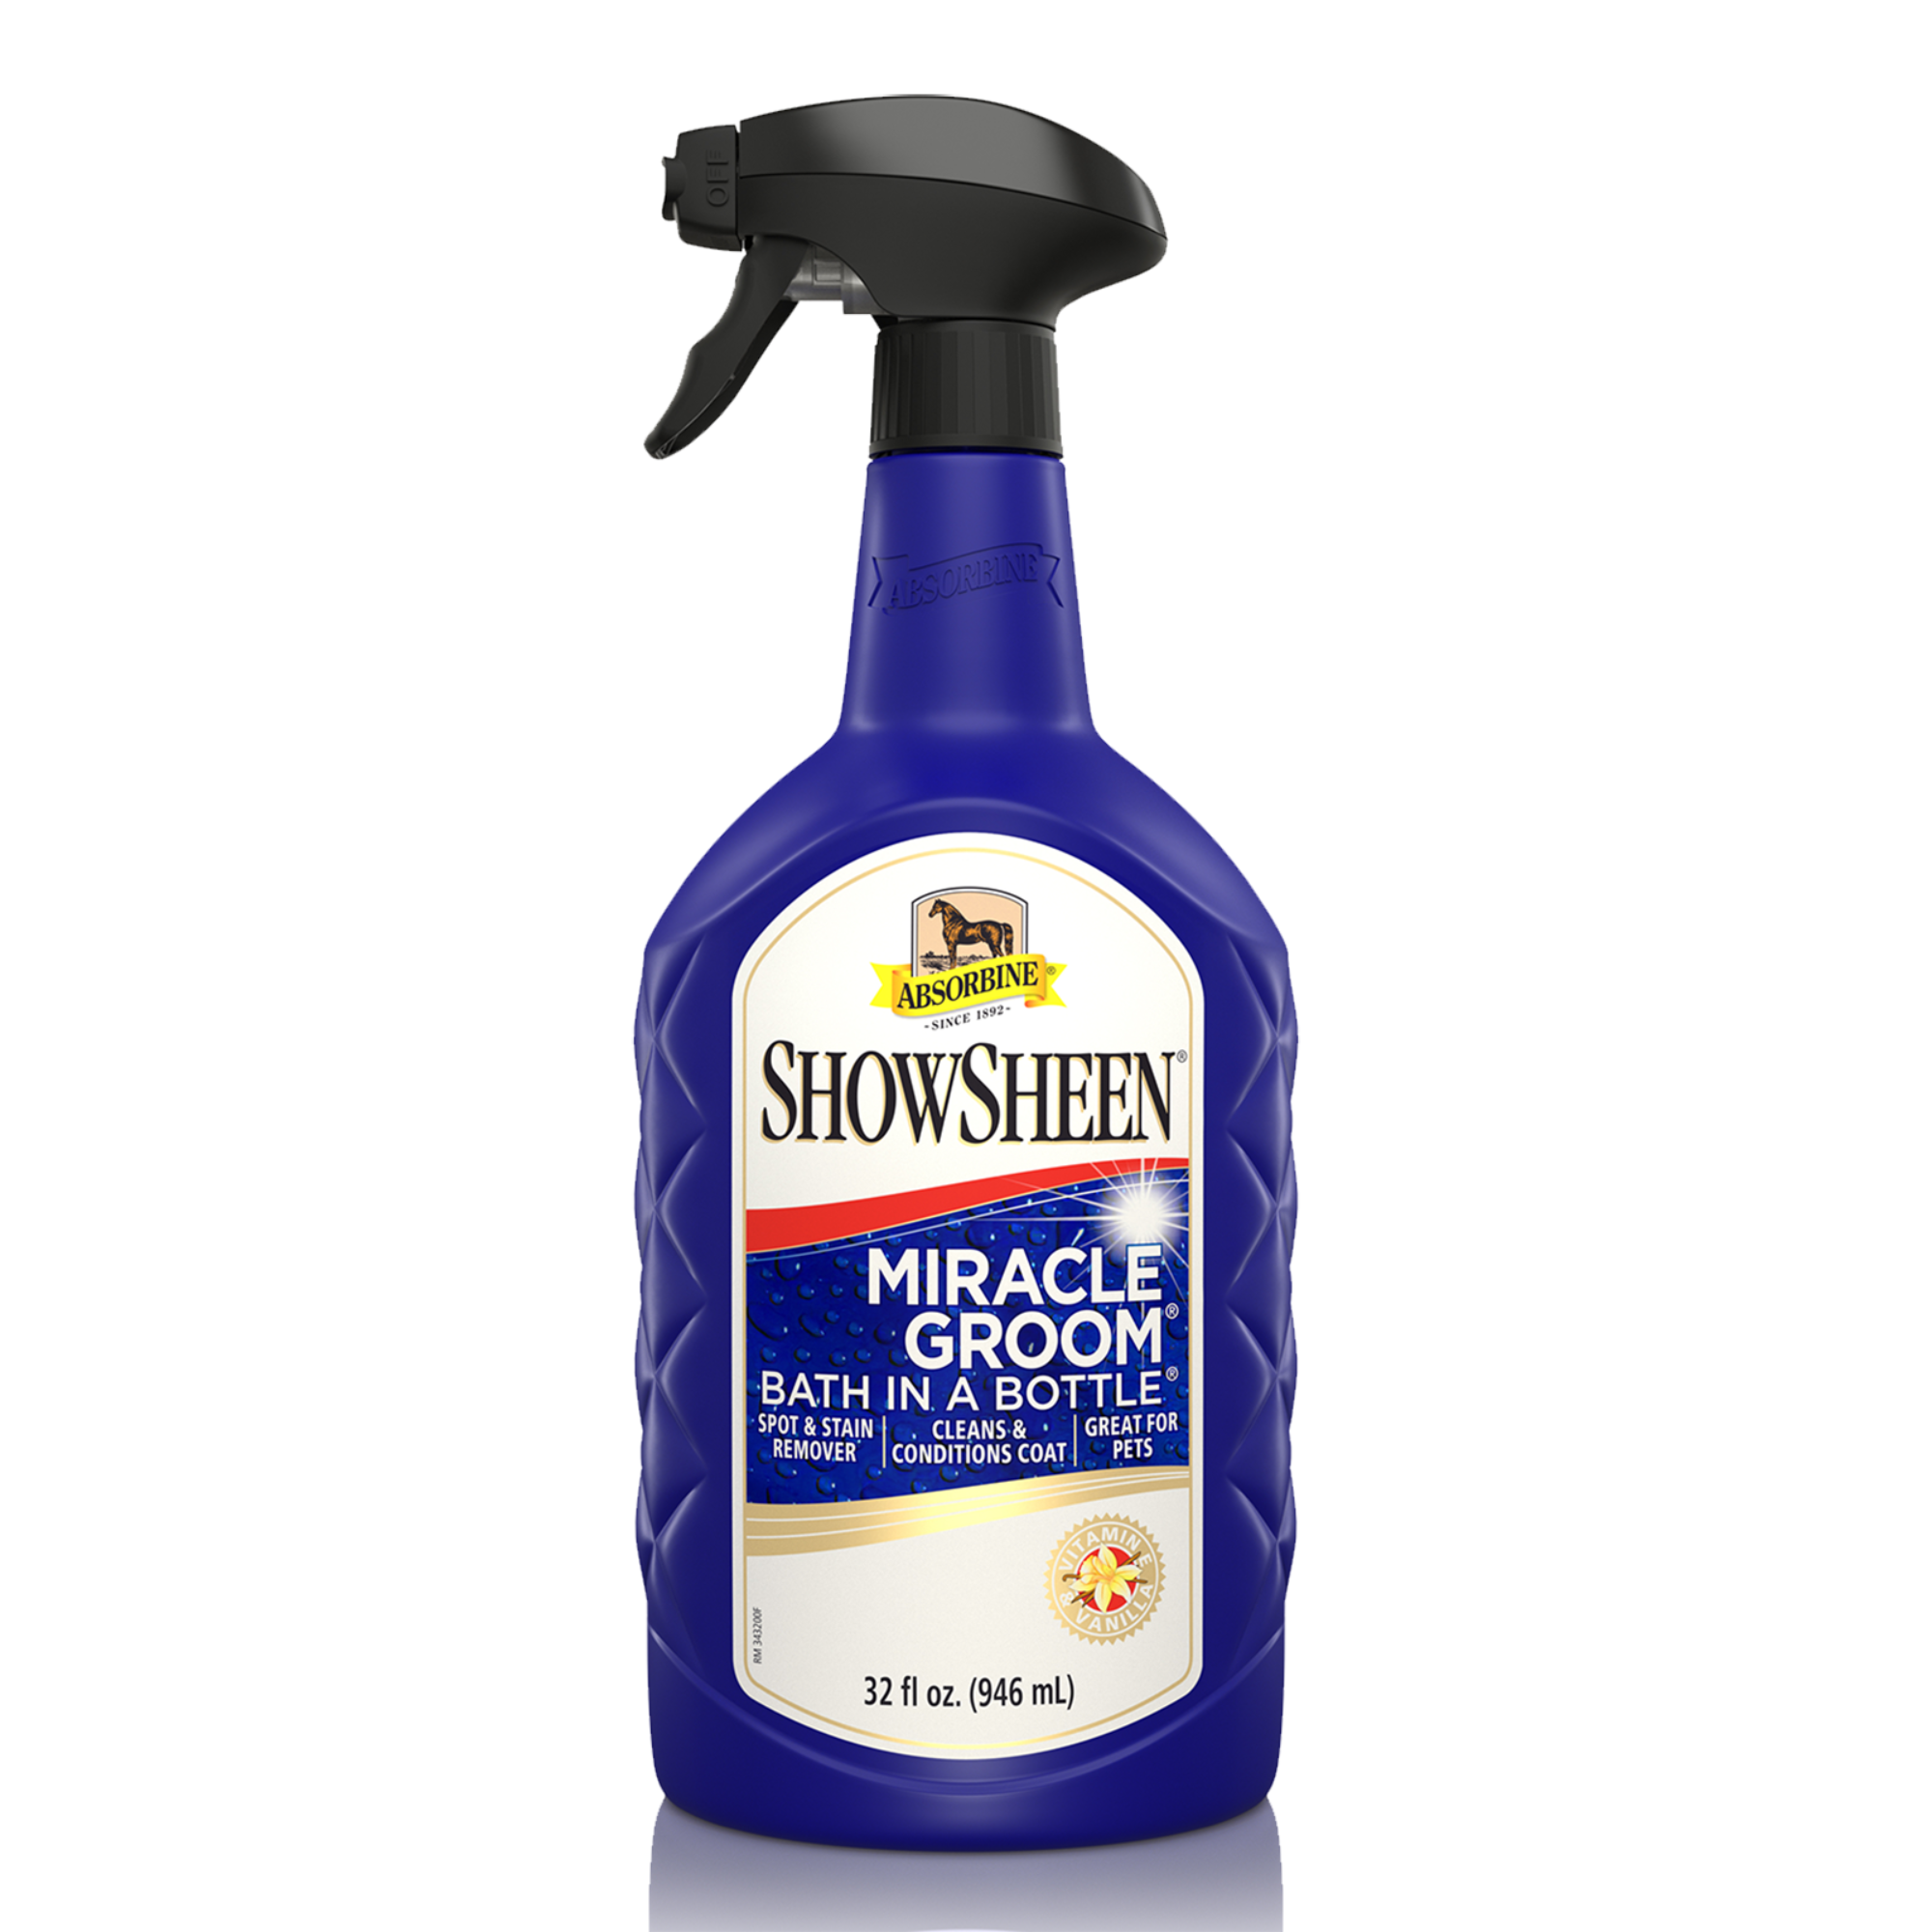 Showsheen Miracle Groom 32 fluid ounce blue bottle with black sprayer.  Bath in a bottle spot and stain remover.  Cleans and conditions coat, great for pets! 